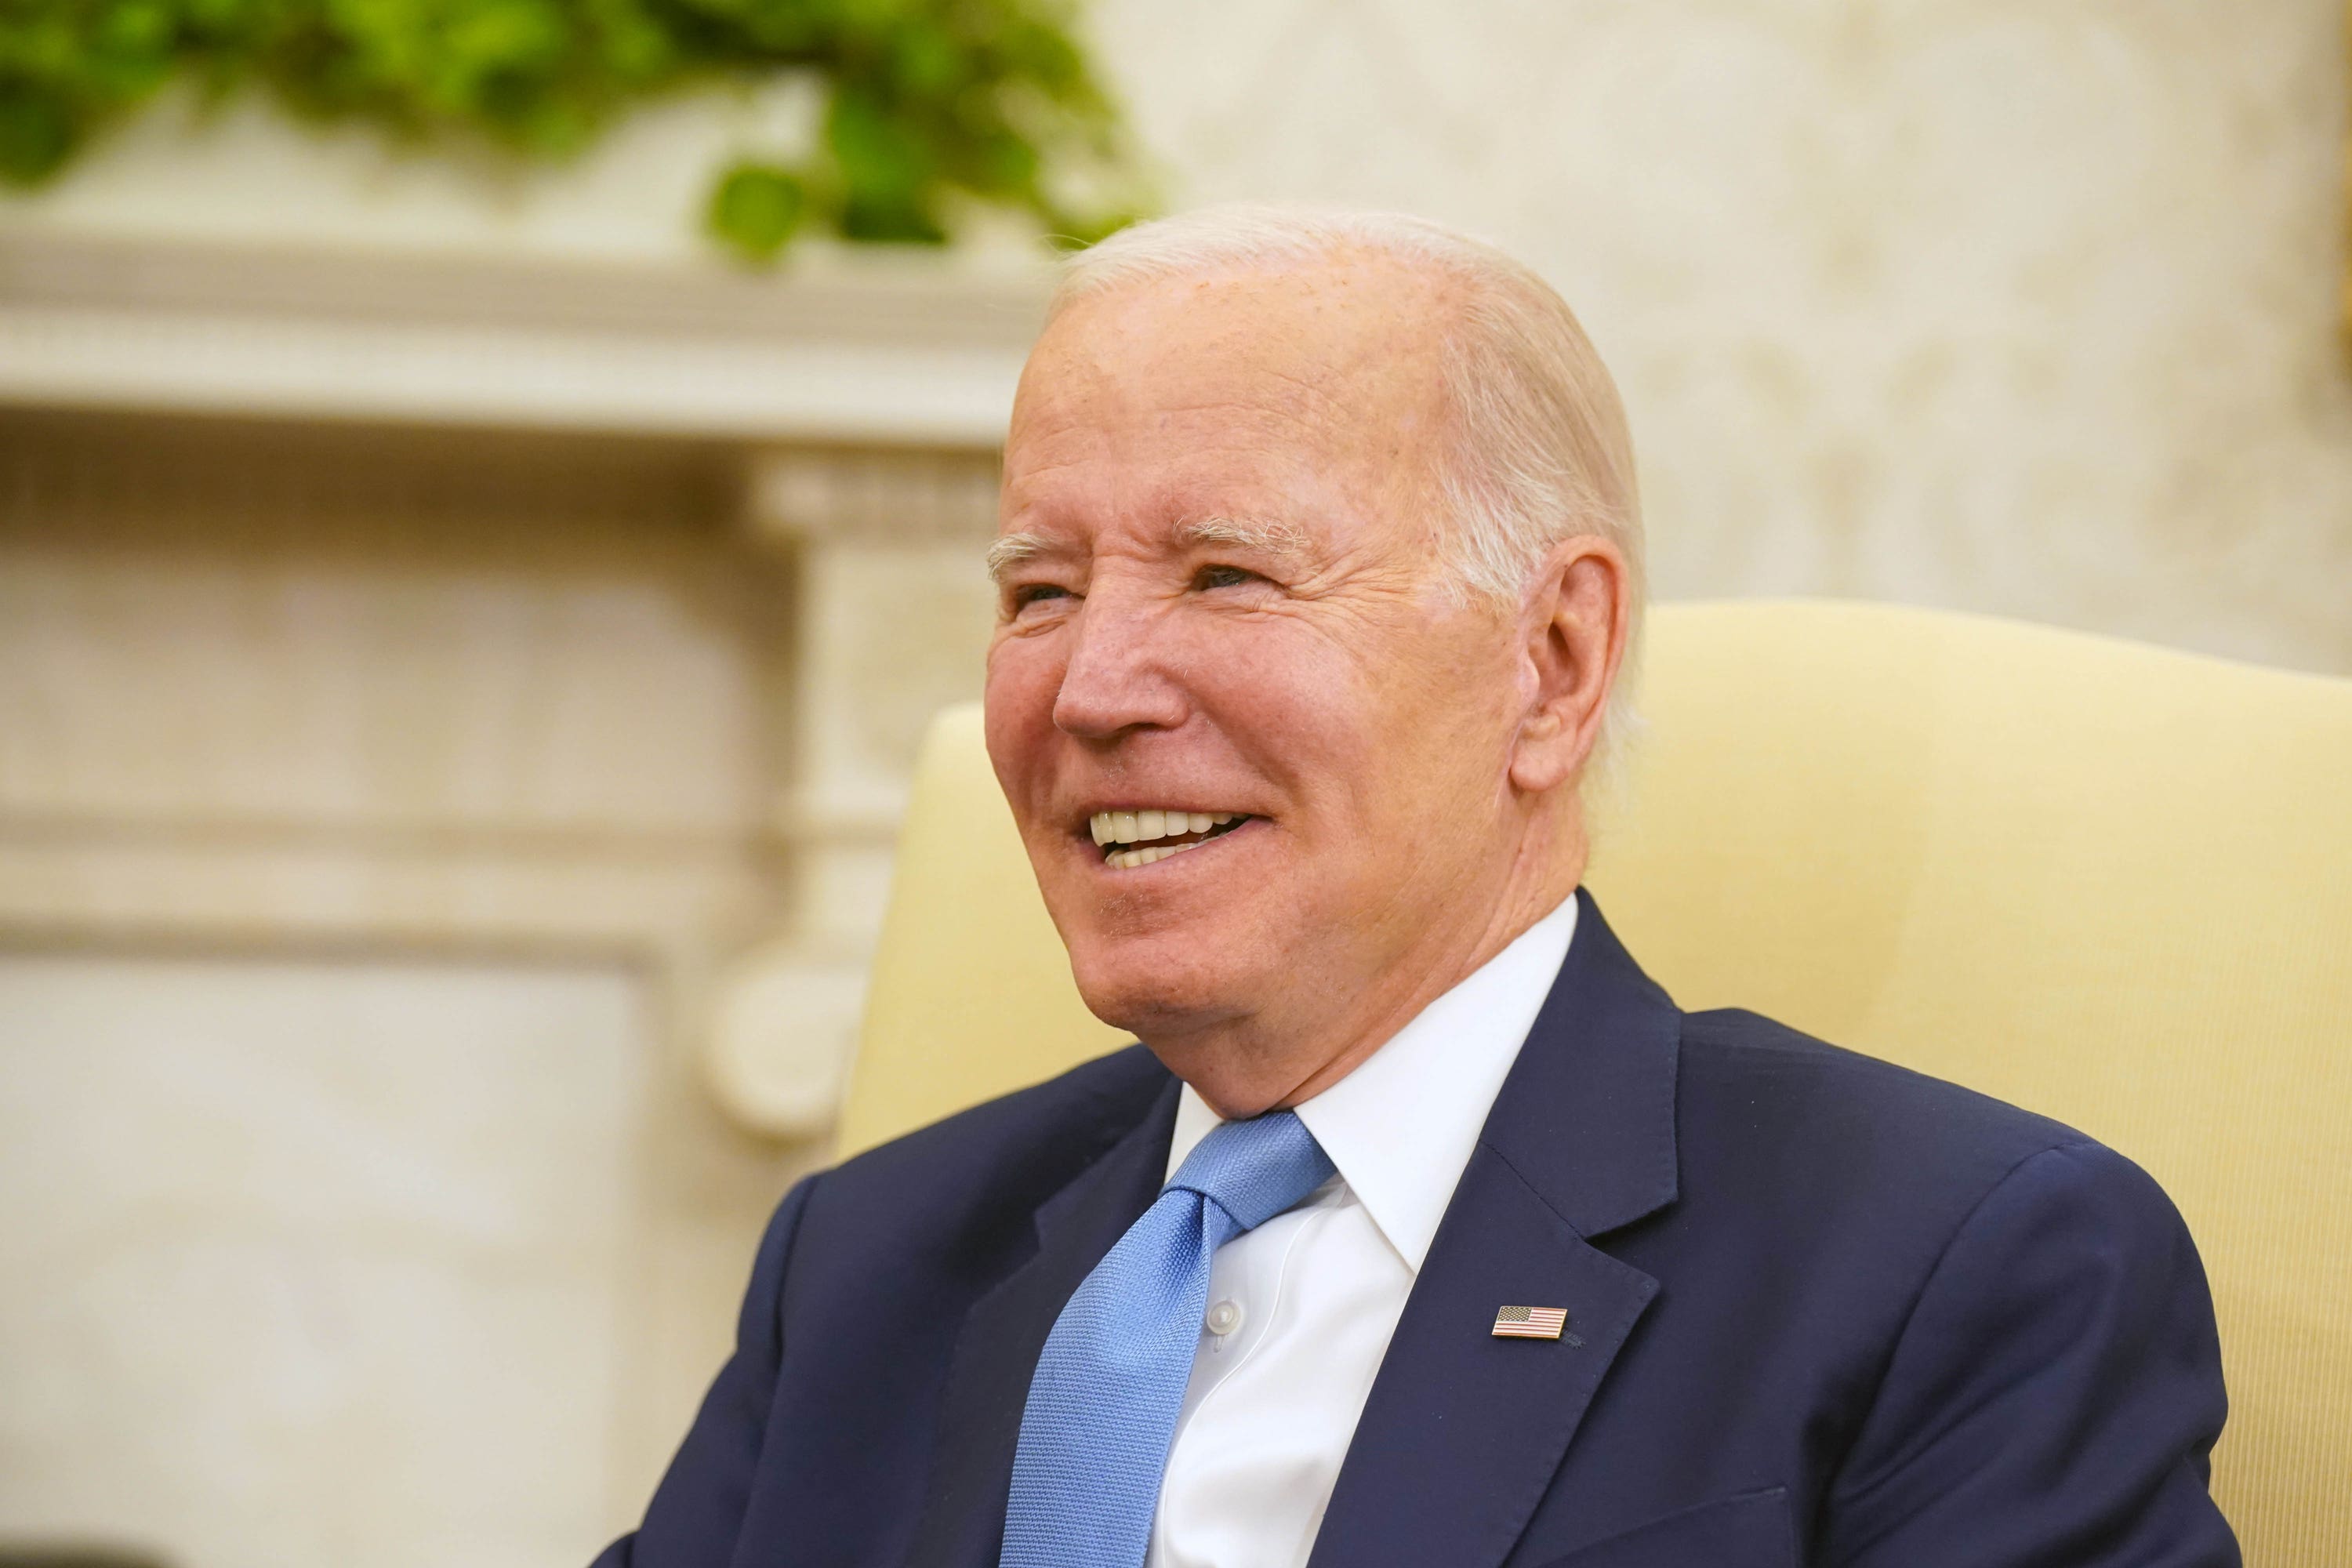 US President Joe Biden will meet the Prime Minister and the King